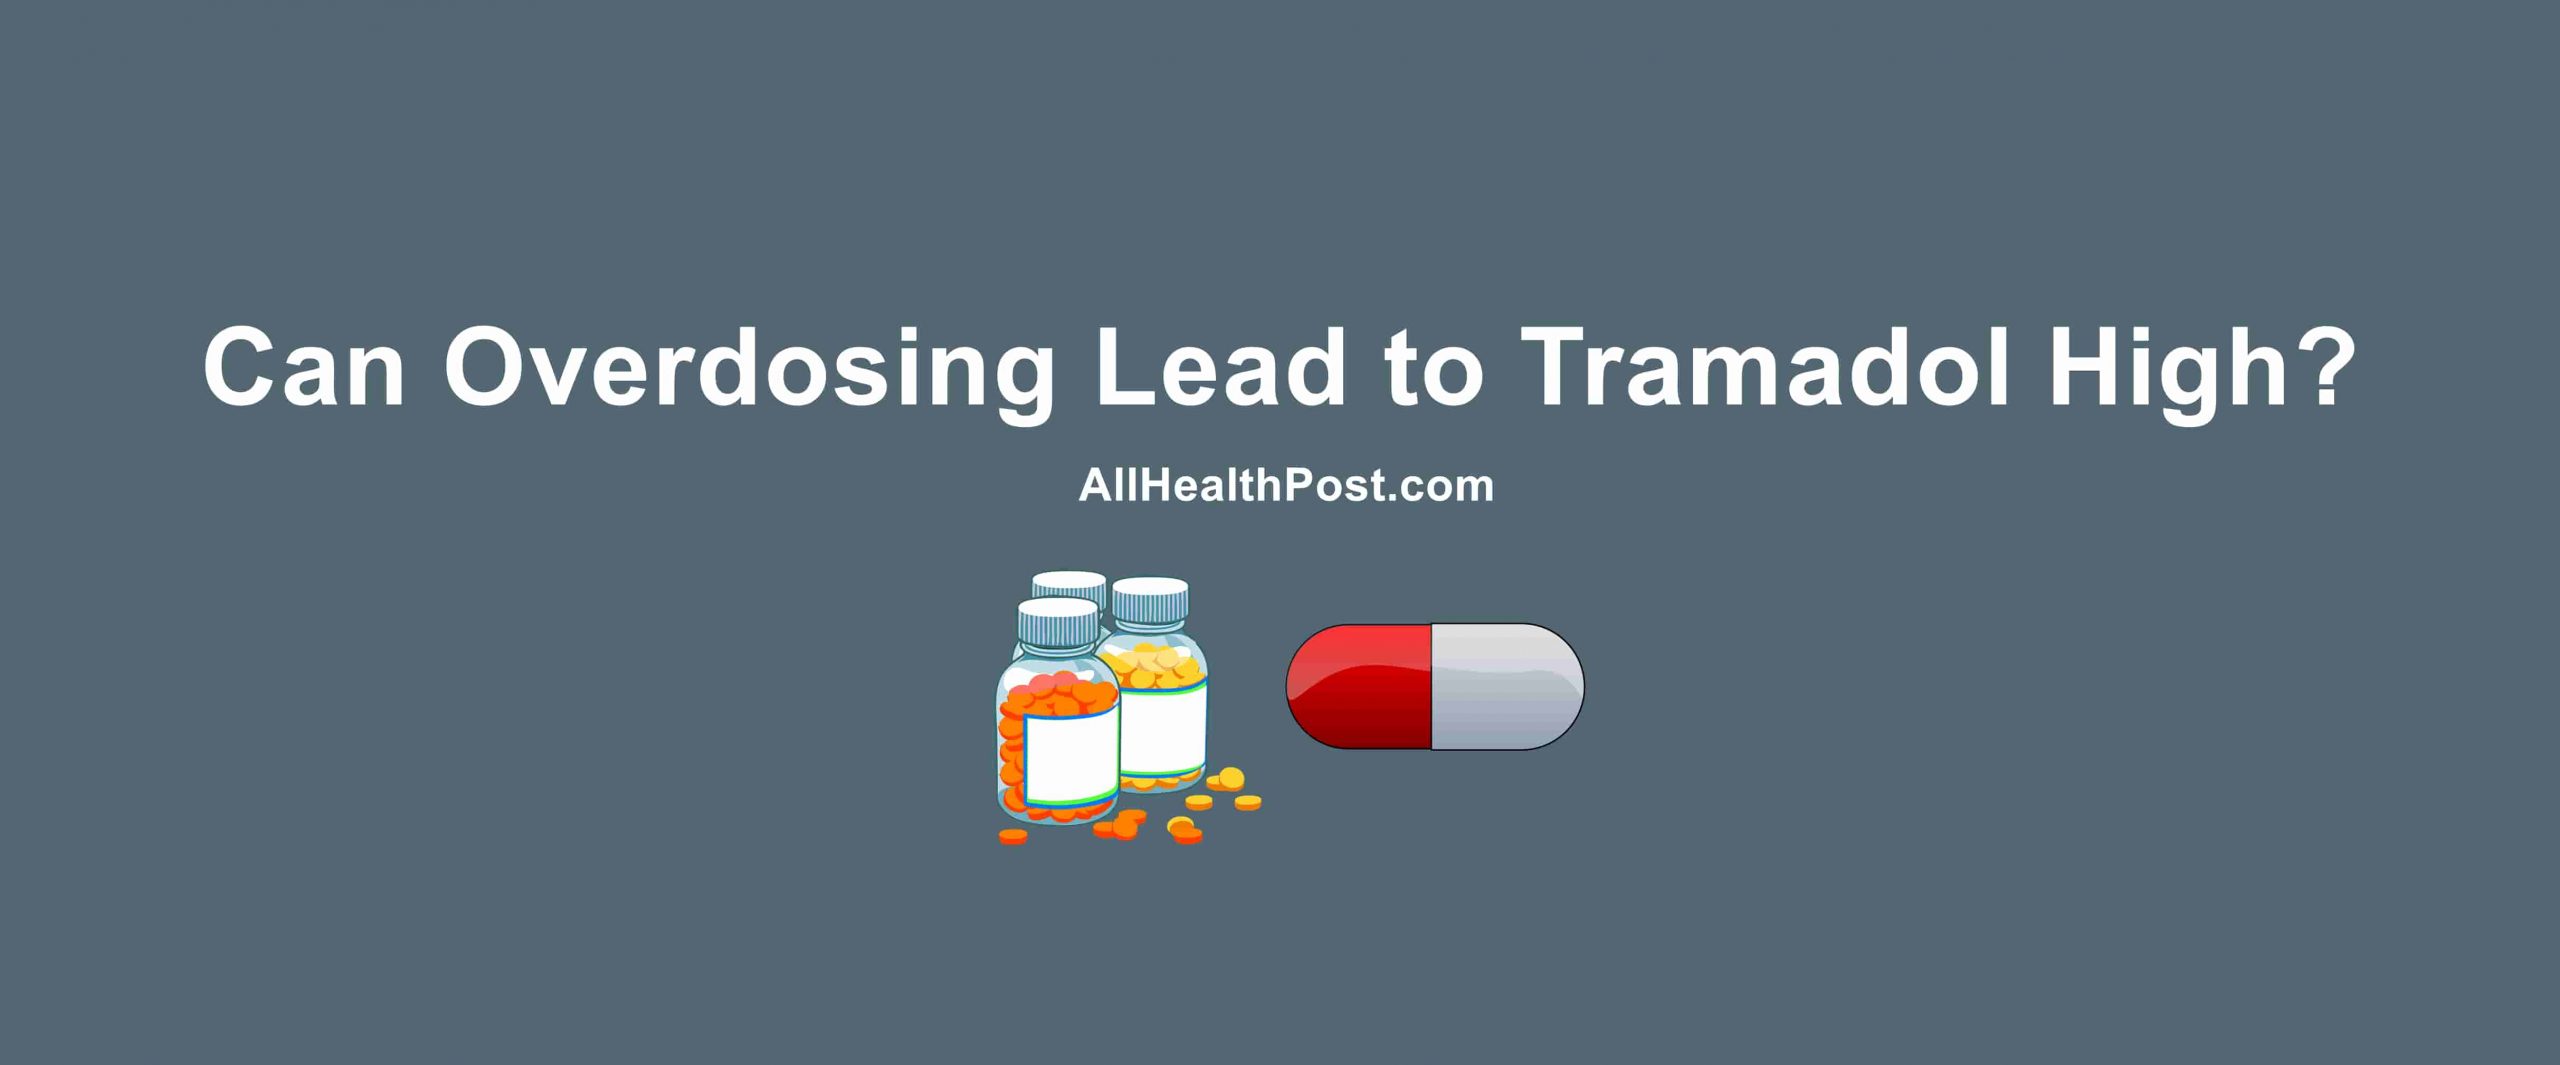 Can Overdosing Lead to Tramadol High